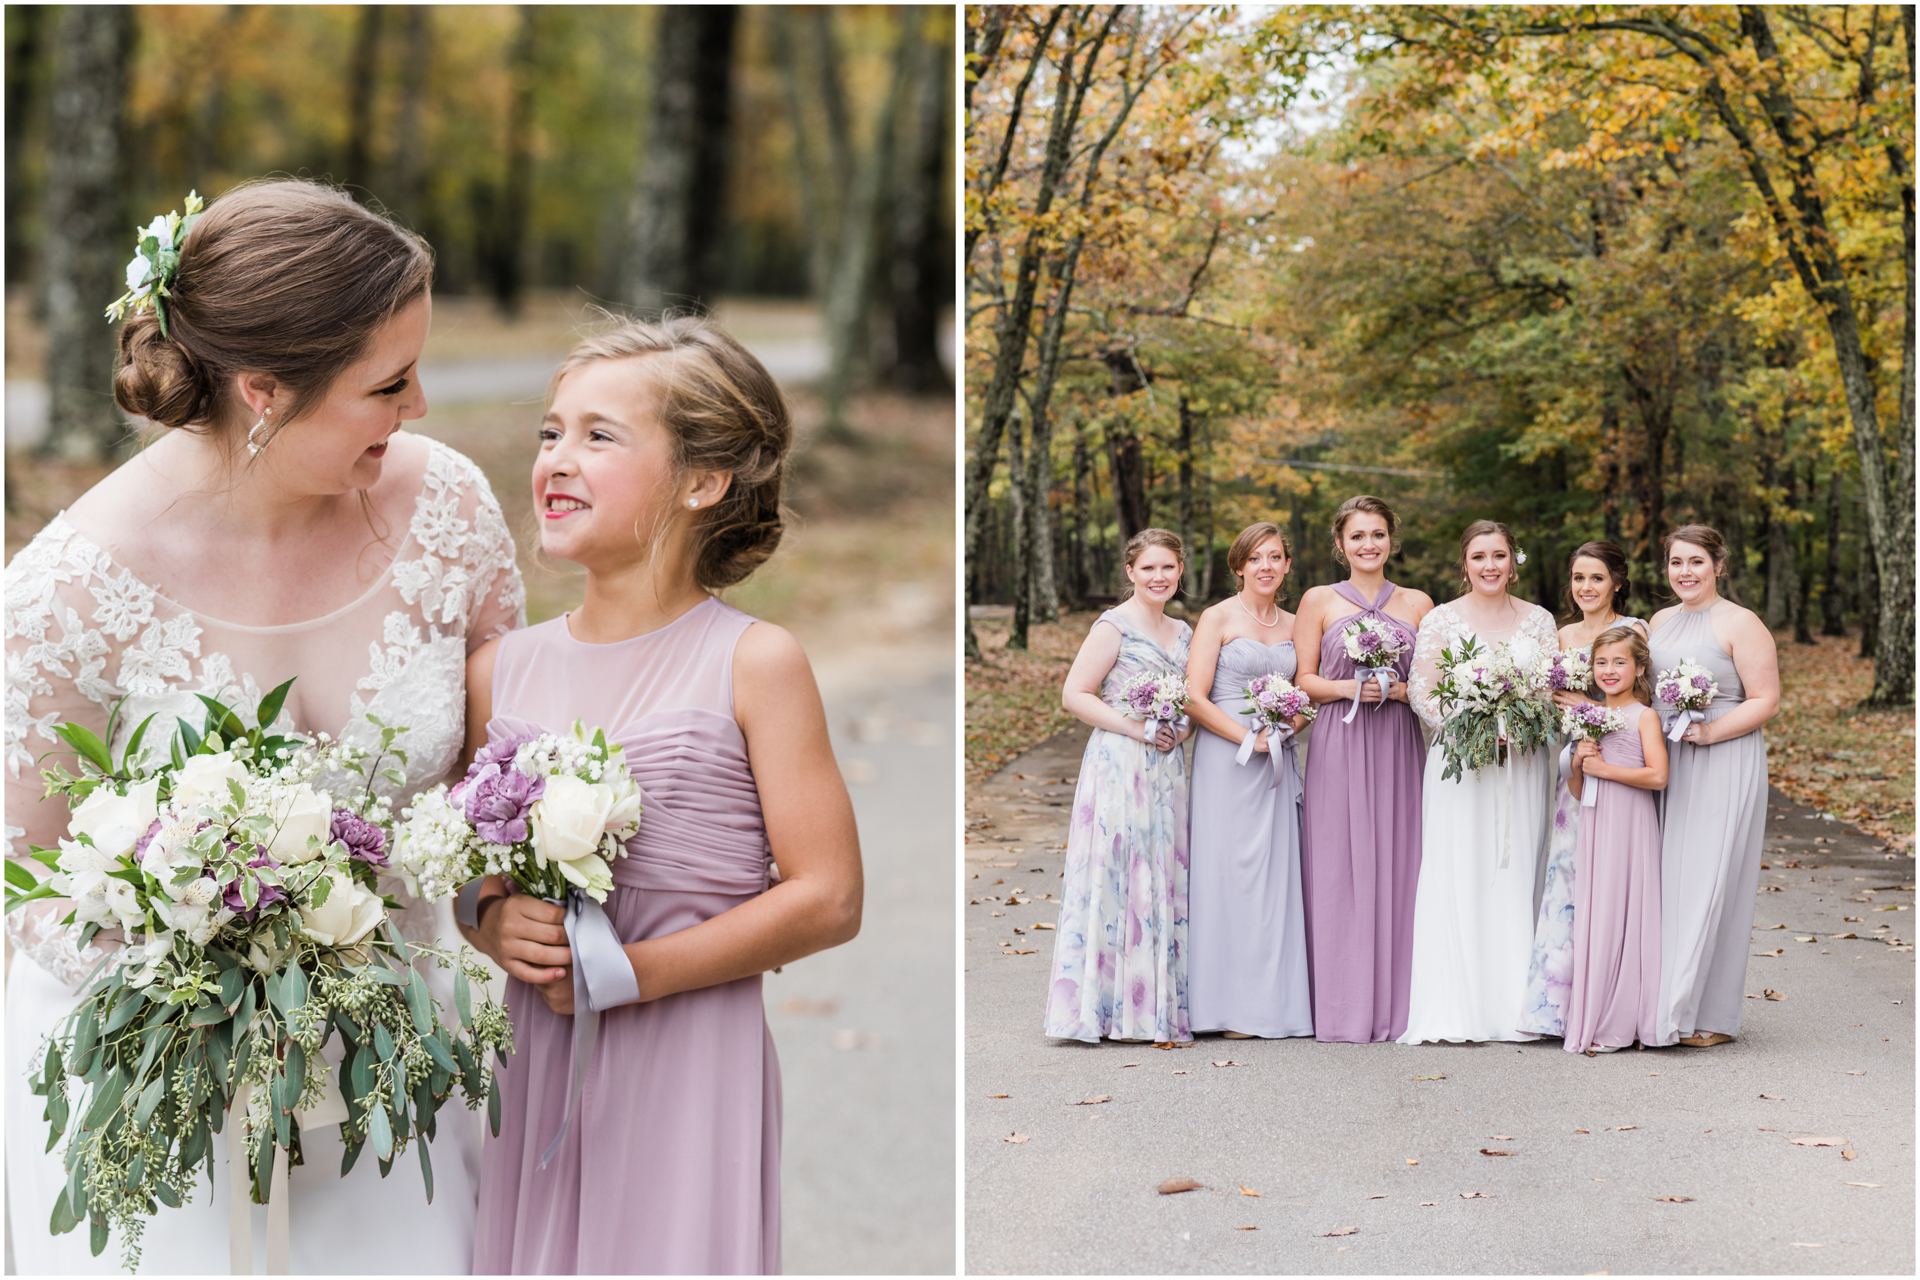 Junior Bridesmaids in Lavender Dress Looking at Bride Mix Matched Purple and Gray Bridesmaid - Monte Sano Lodge Fall Wedding